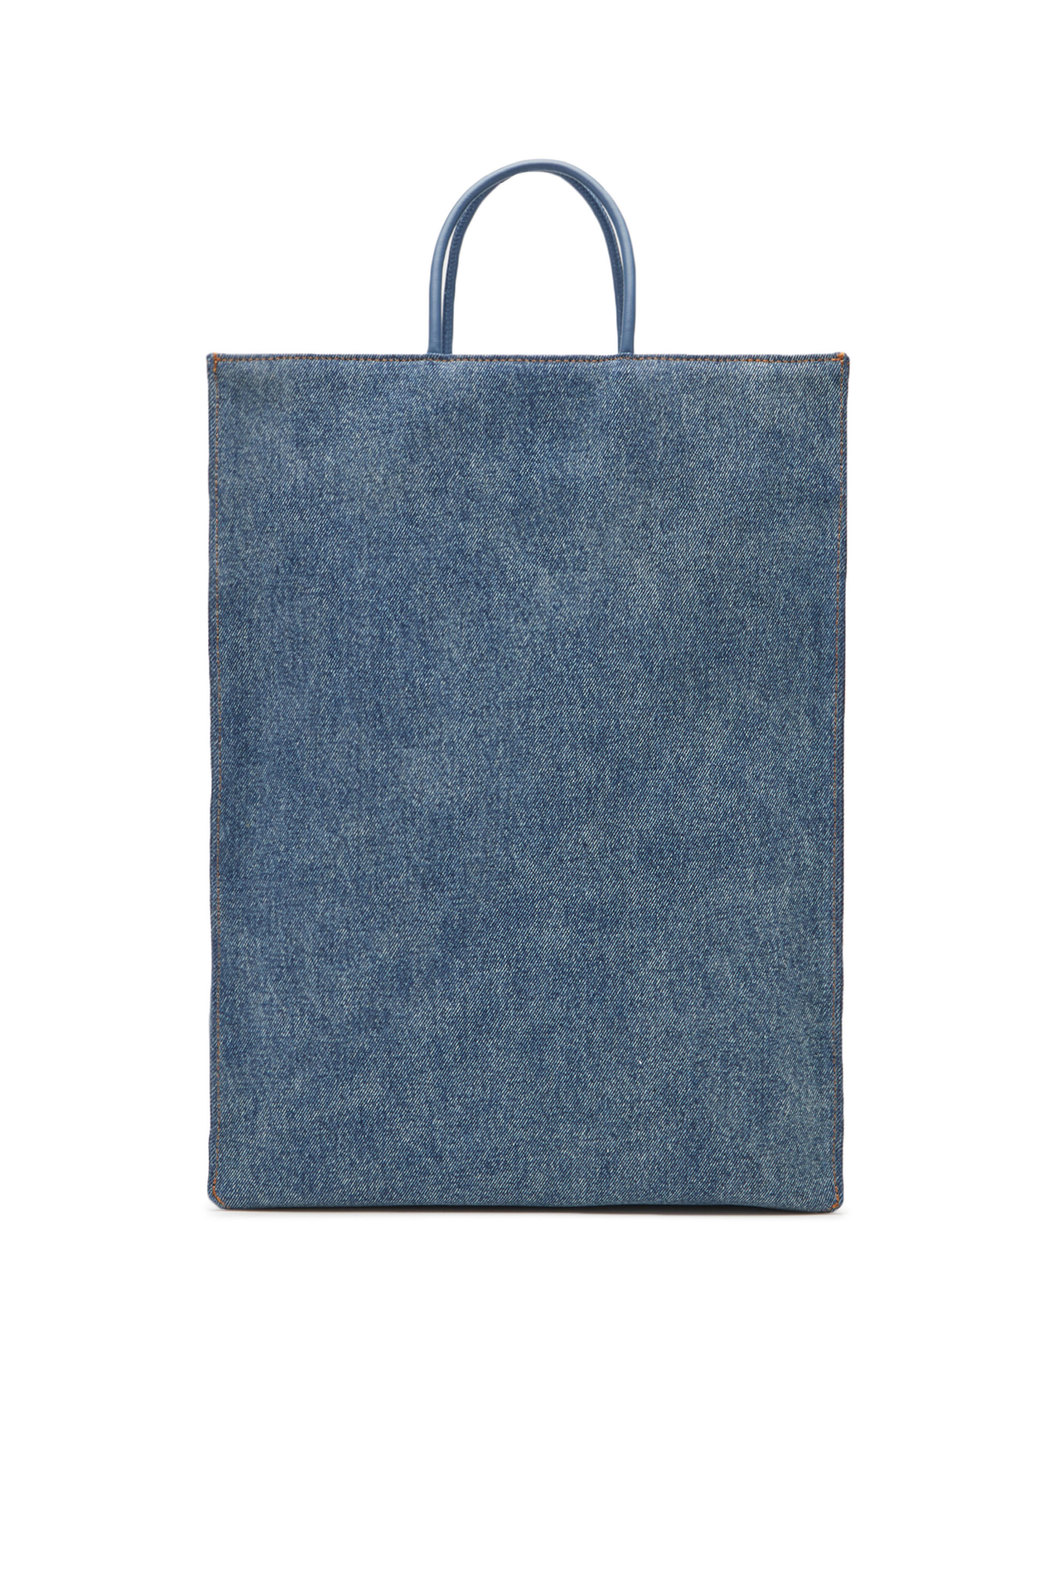 Large tote in overdyed denim